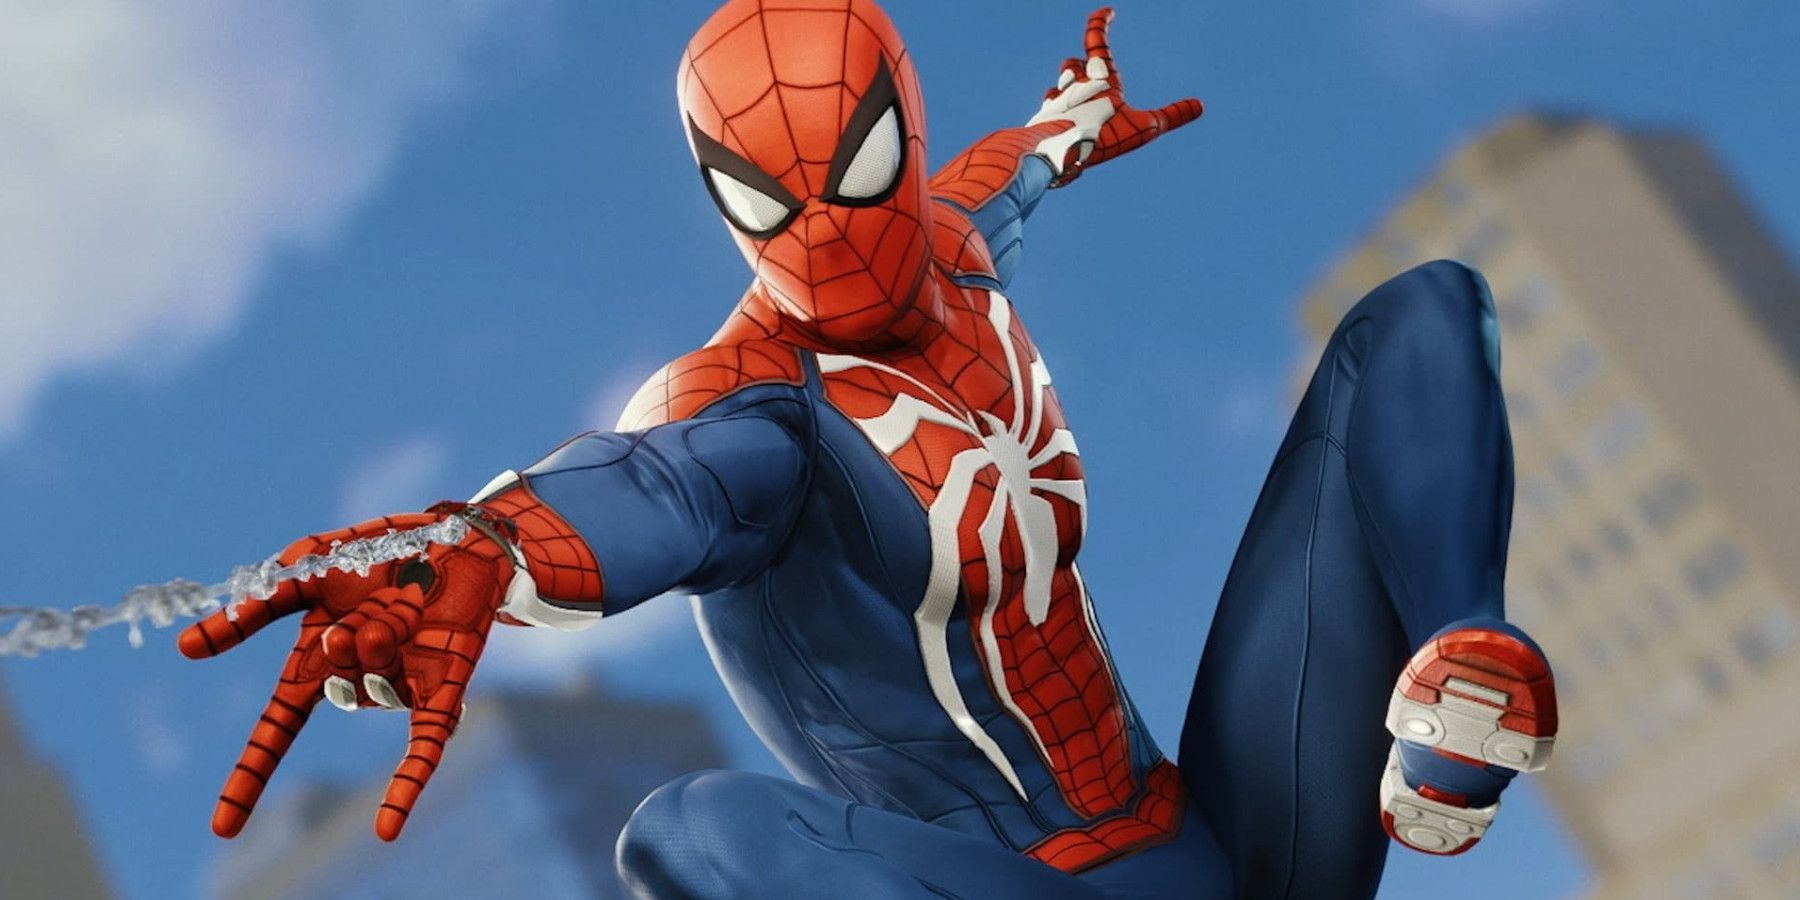 Marvel’s Spider-Man 2 Fans Want a Similar Opening to The
2018 Game